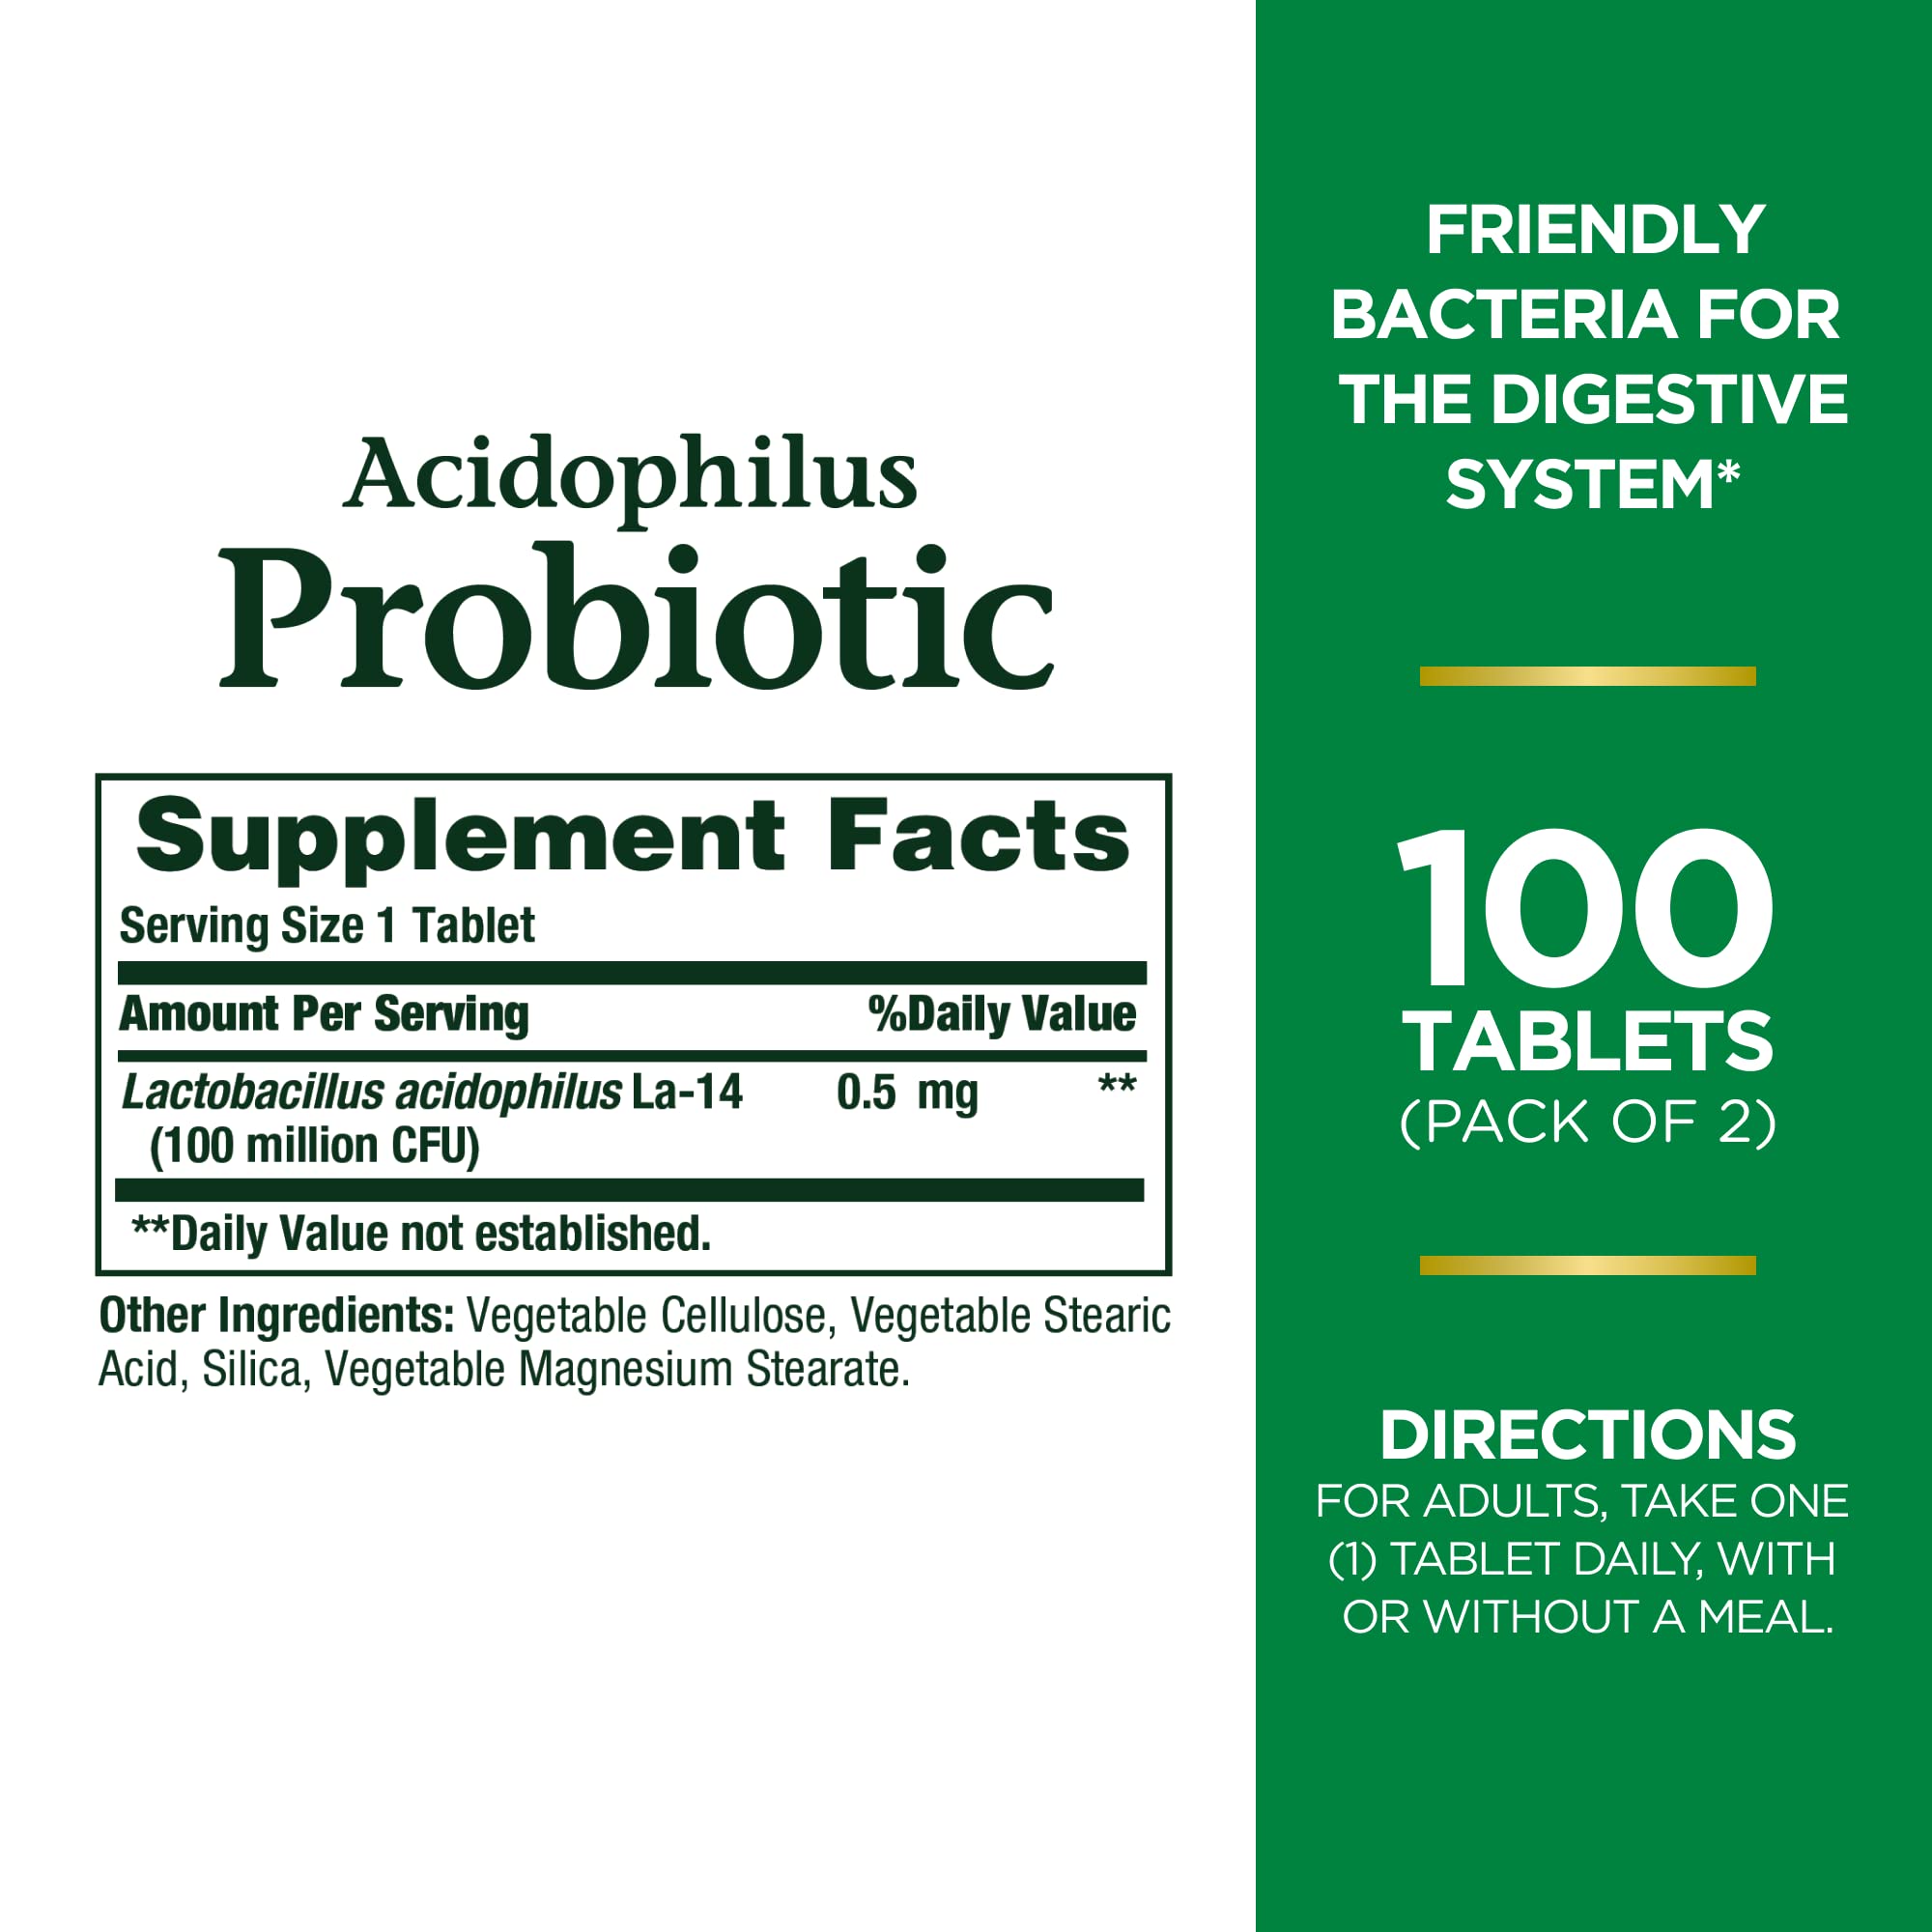 Nature’s Bounty Acidophilus Probiotic, Daily Probiotic Supplement, Supports Digestive Health, Twin Pack, 200 Tablets